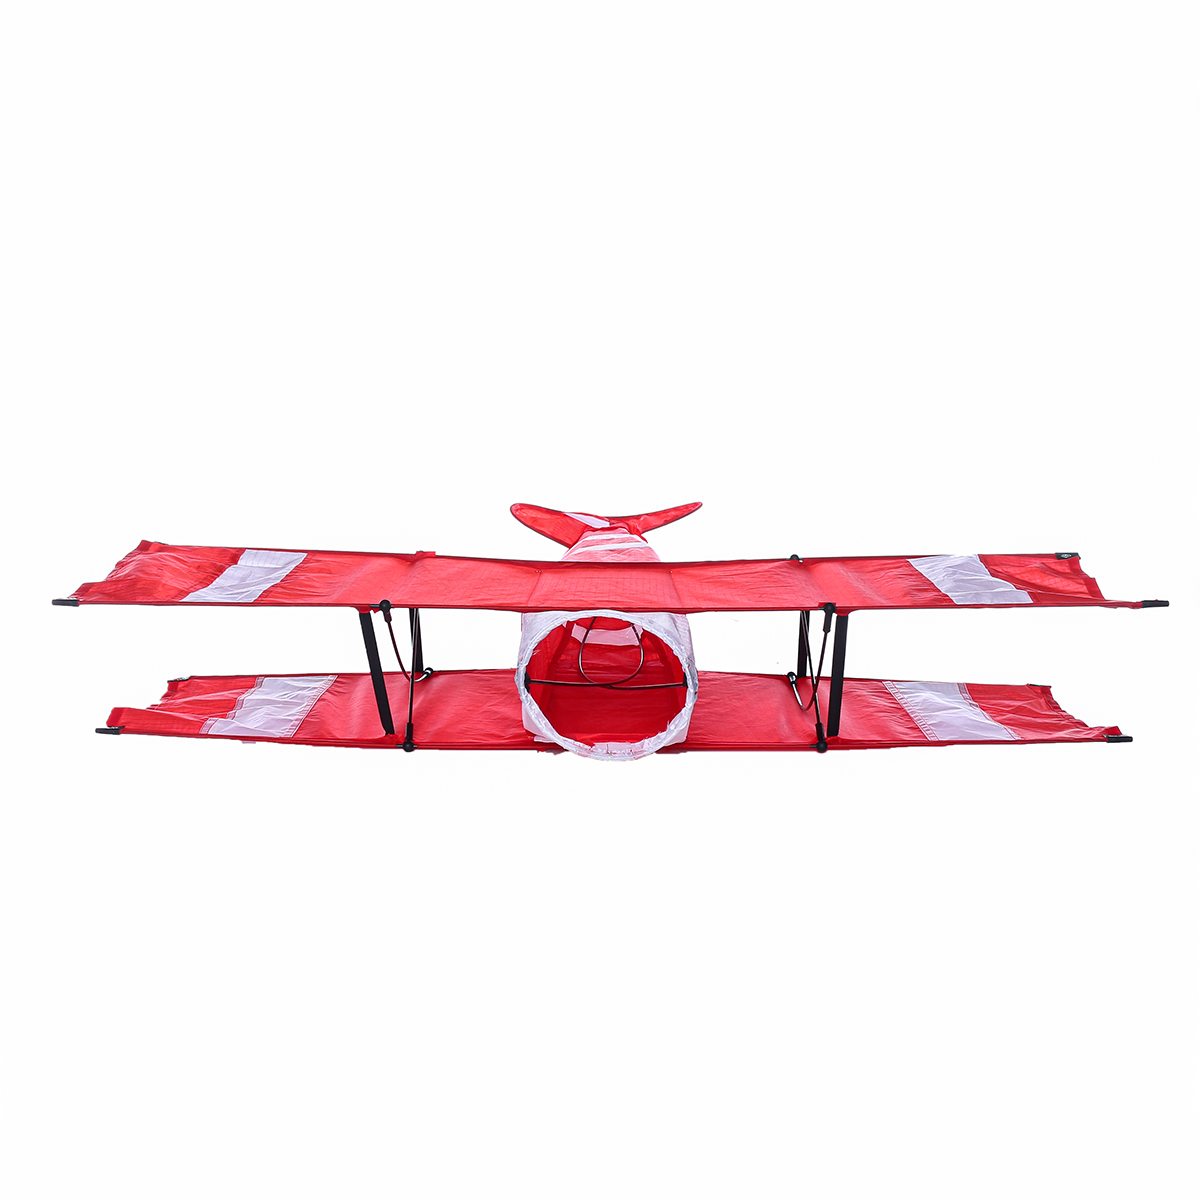 Colorful-3D-Aircraft-Kite-With-Handle-and-Line-Good-Flying-Gift-1610431-6